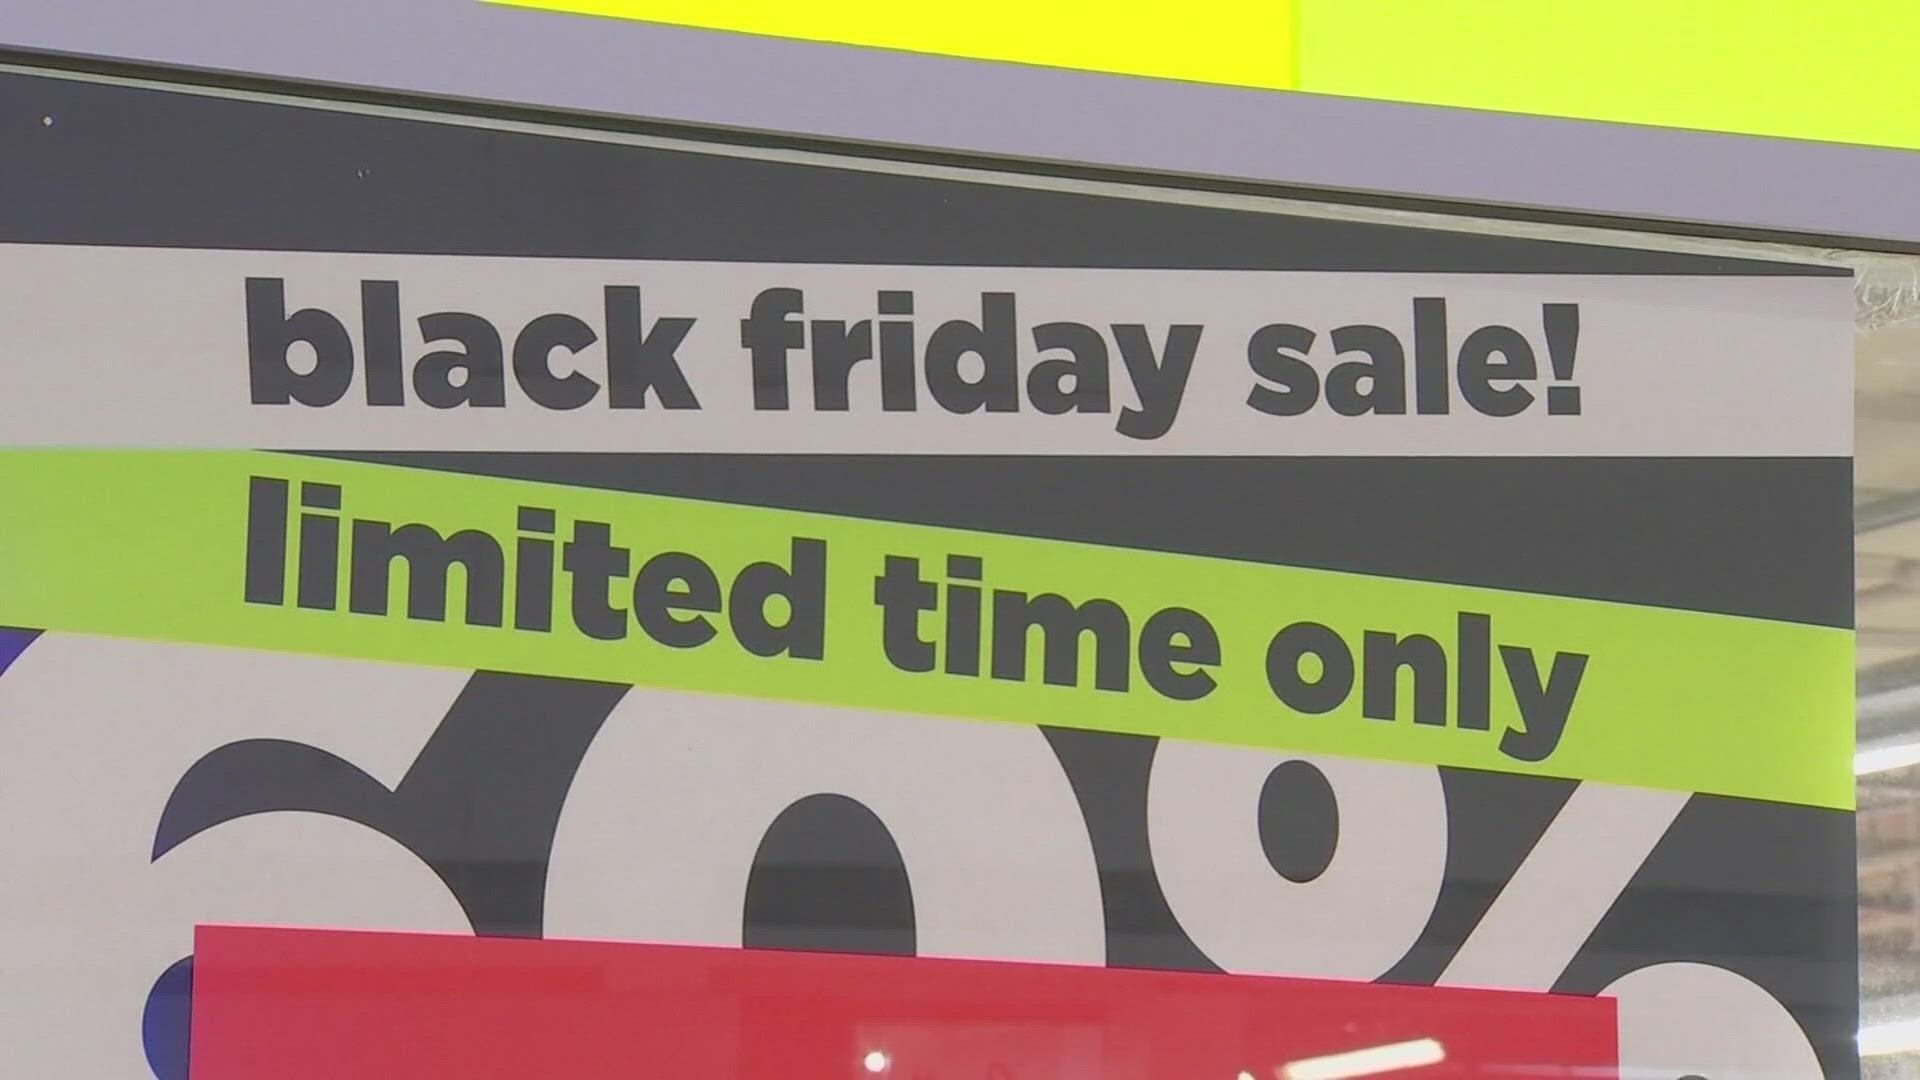 6 News has all the deals and discounts this Black Friday